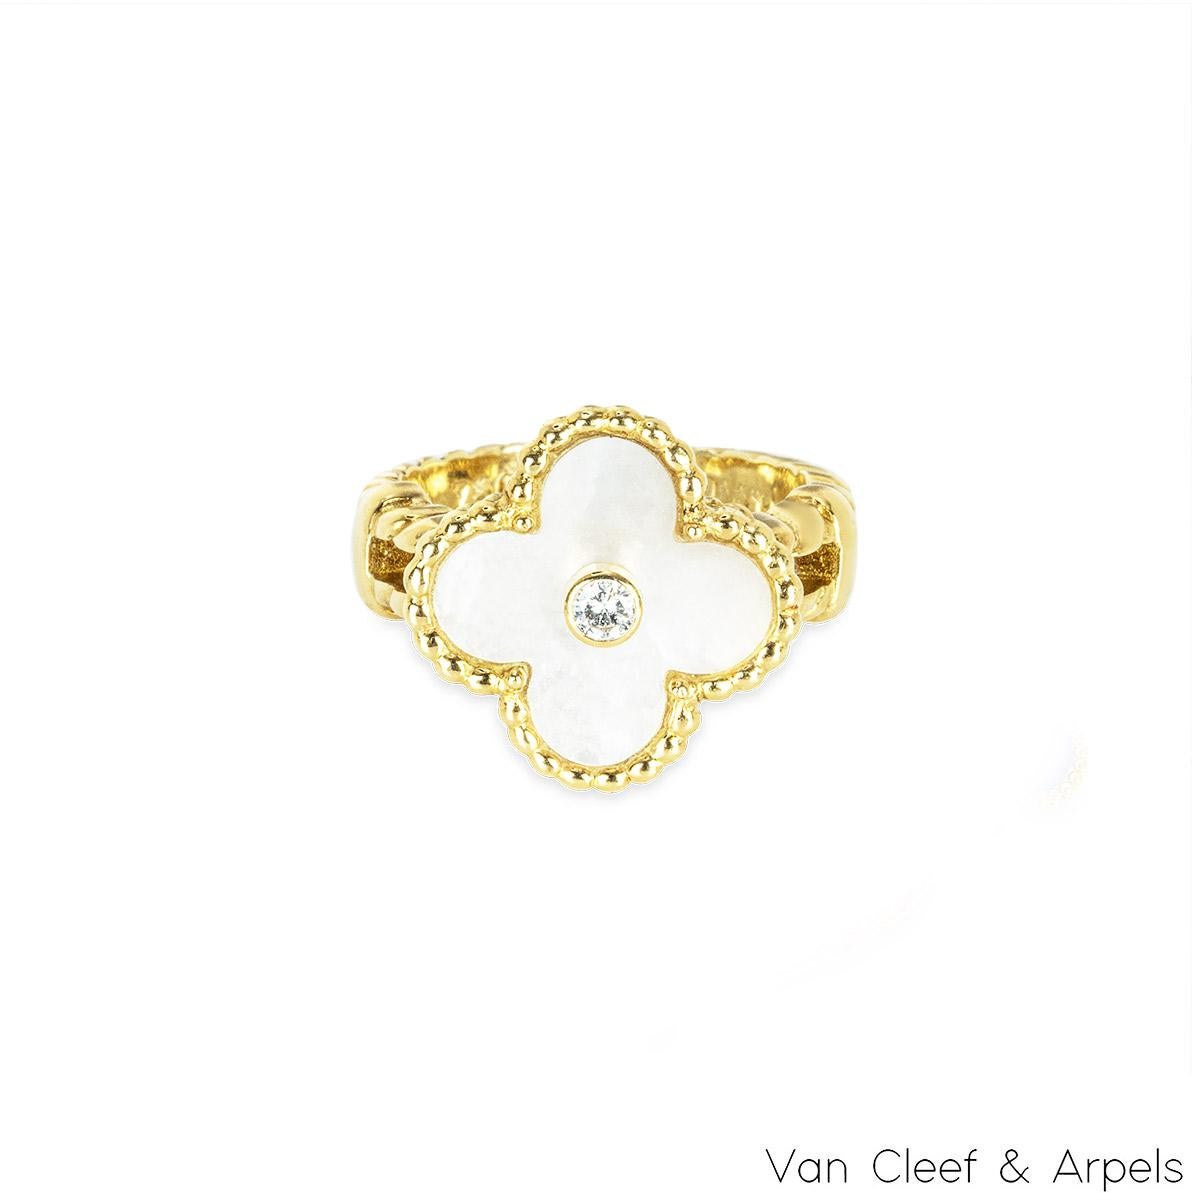 Brilliant Cut Van Cleef & Arpels Yellow Gold Diamond Alhambra Ring For Sale